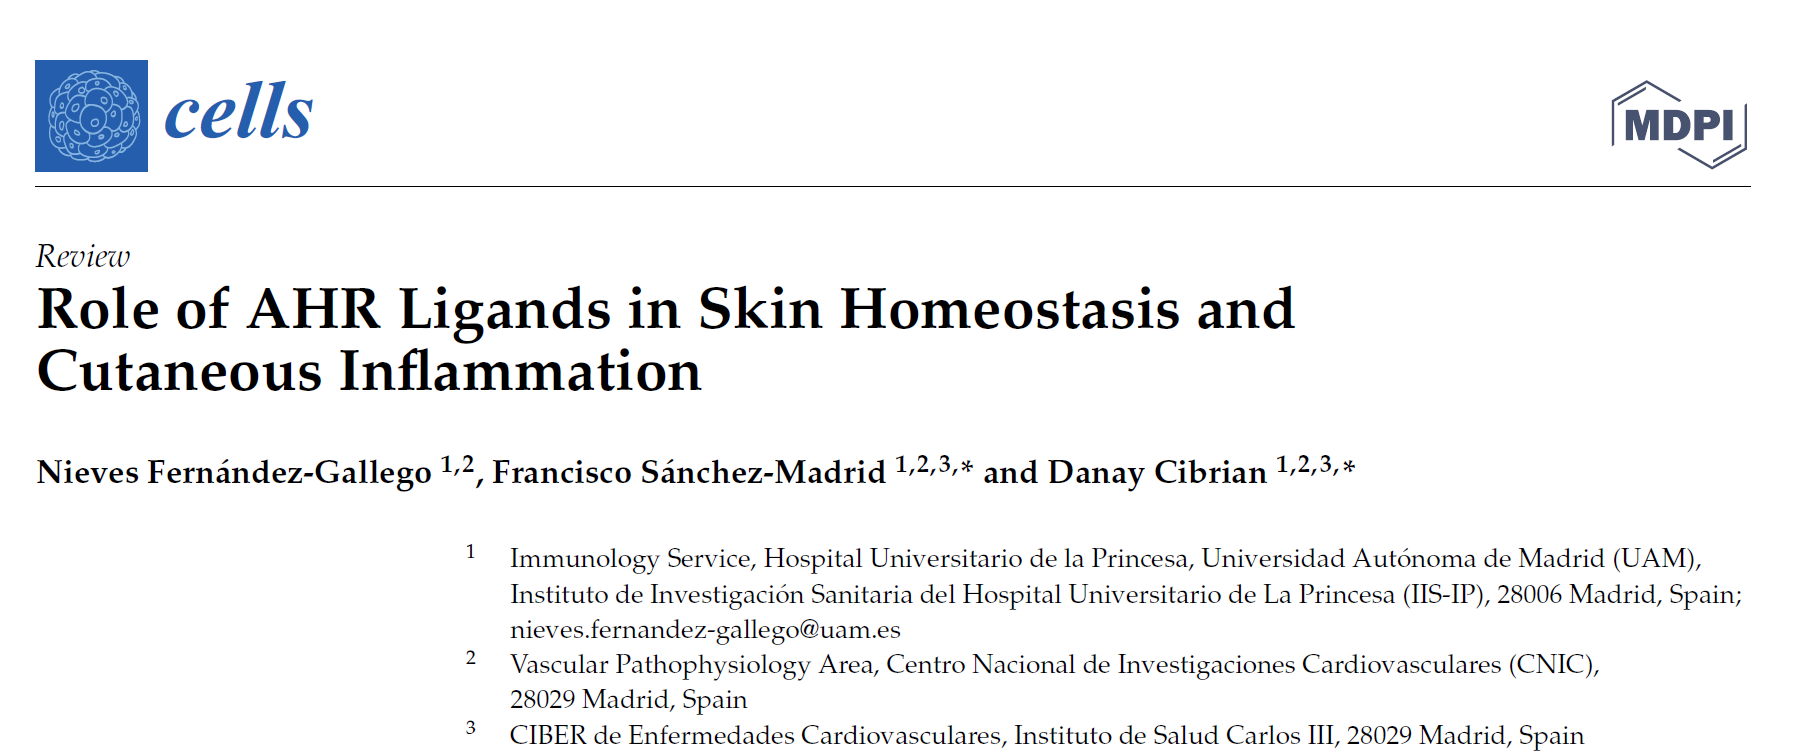 Role of AHR Ligands in Skin Homeostasis and Cutaneous Inflammation